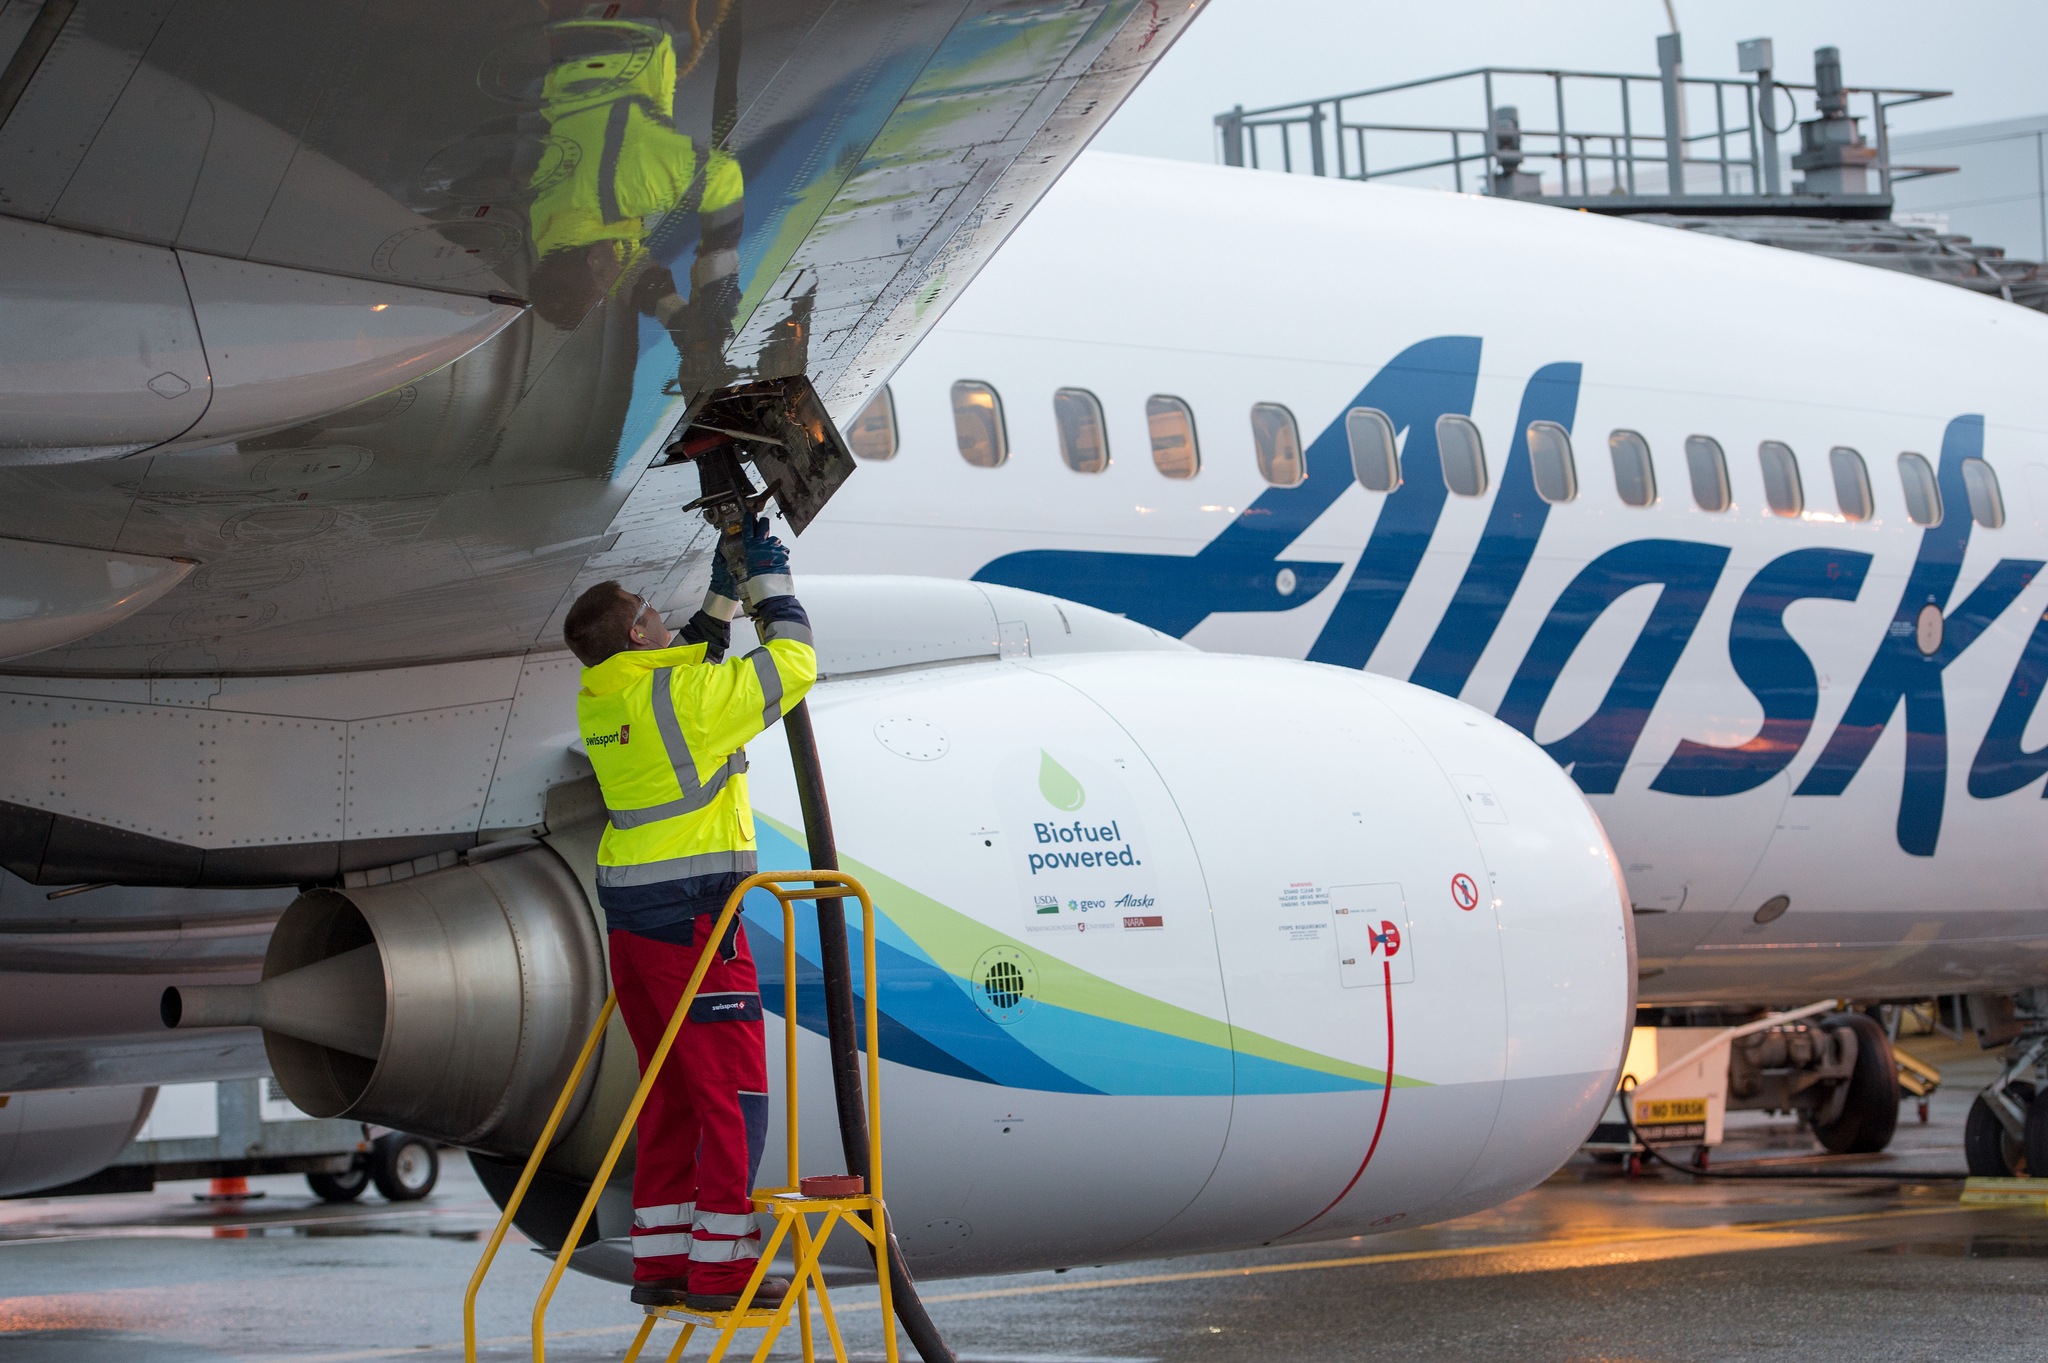 Alaska Airlines runs a biofuel test flight in late 2016. Photo courtesy Alaska Airlines.